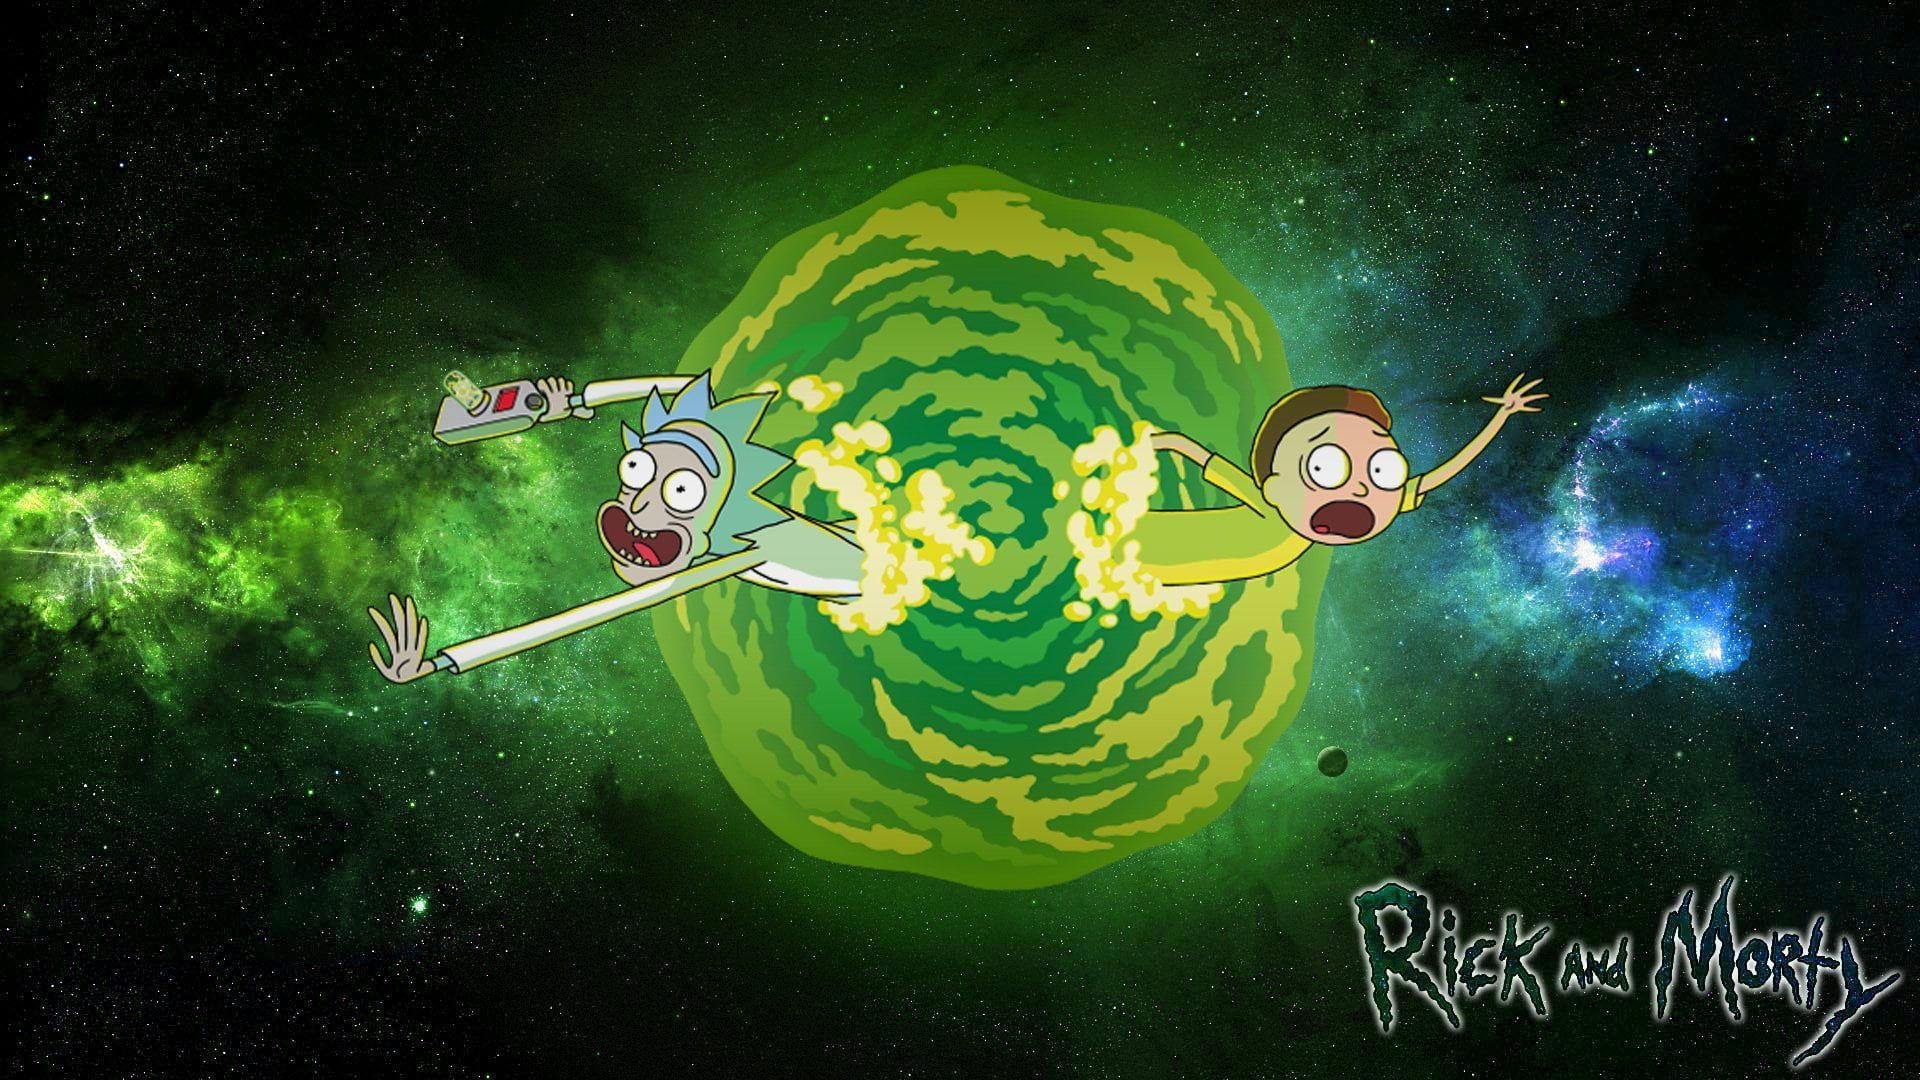 Rick and Morty in the middle of the universe - Rick and Morty